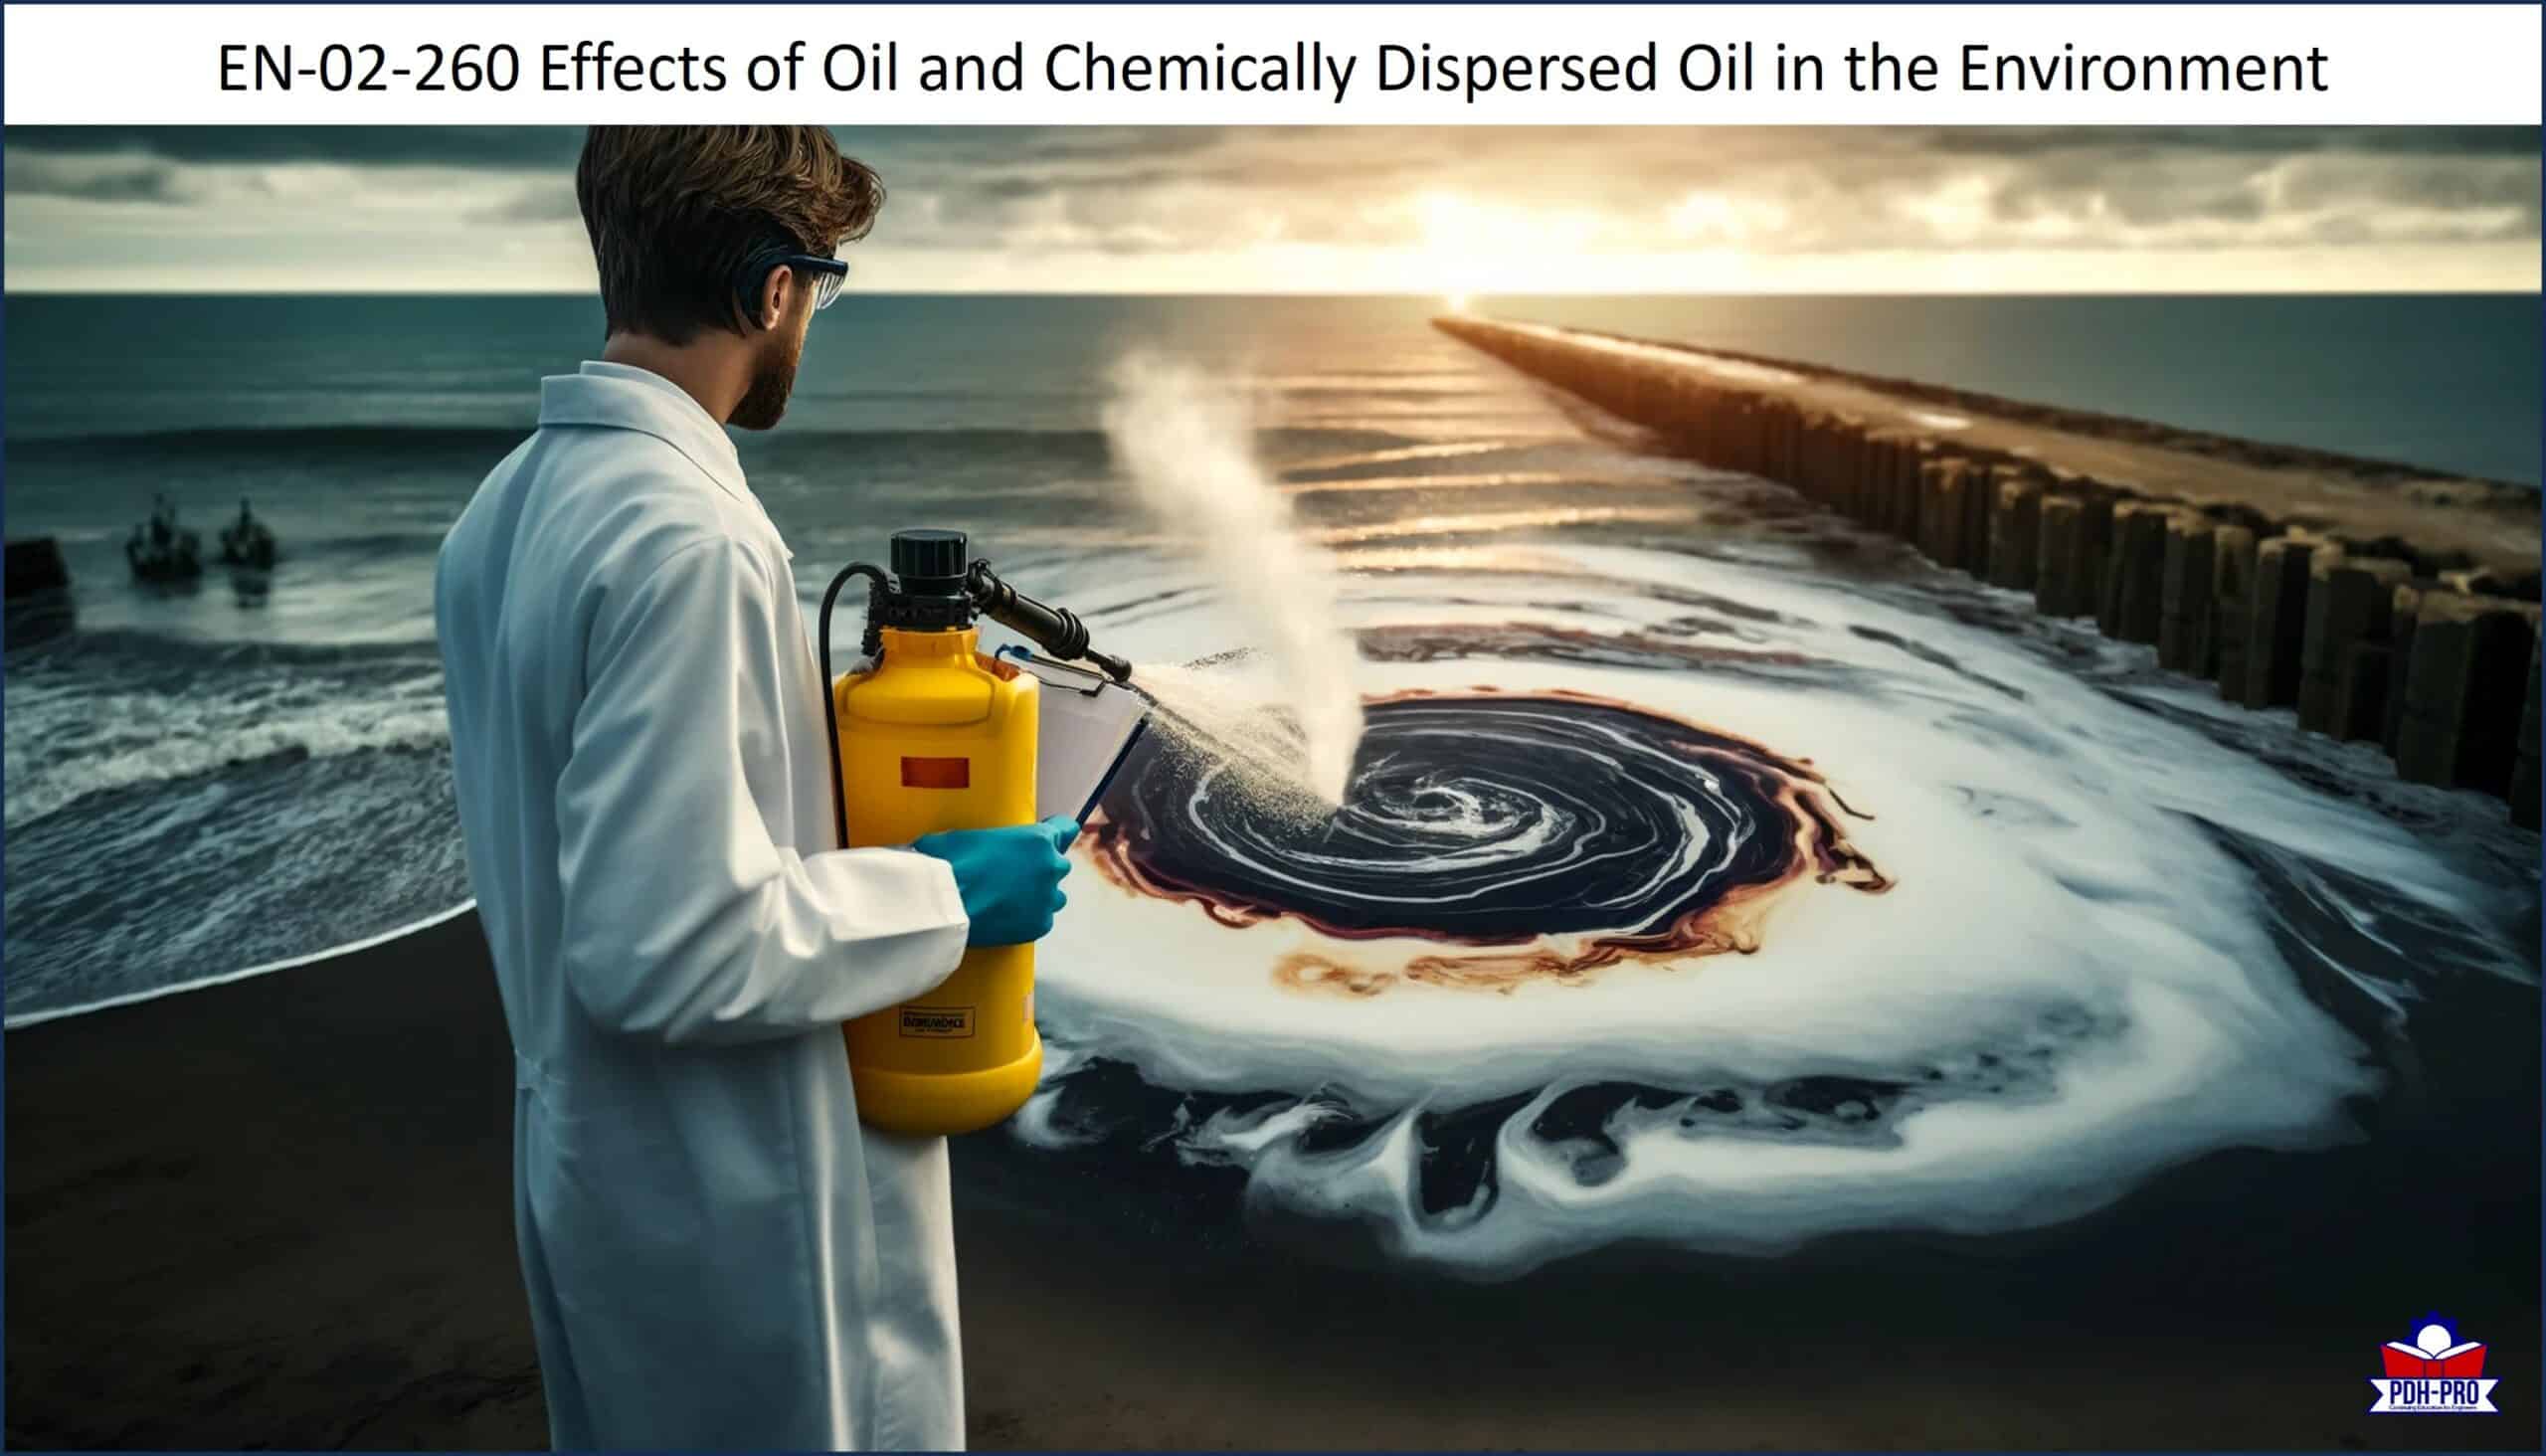 Effects of Oil and Chemically Dispersed Oil in the Environment